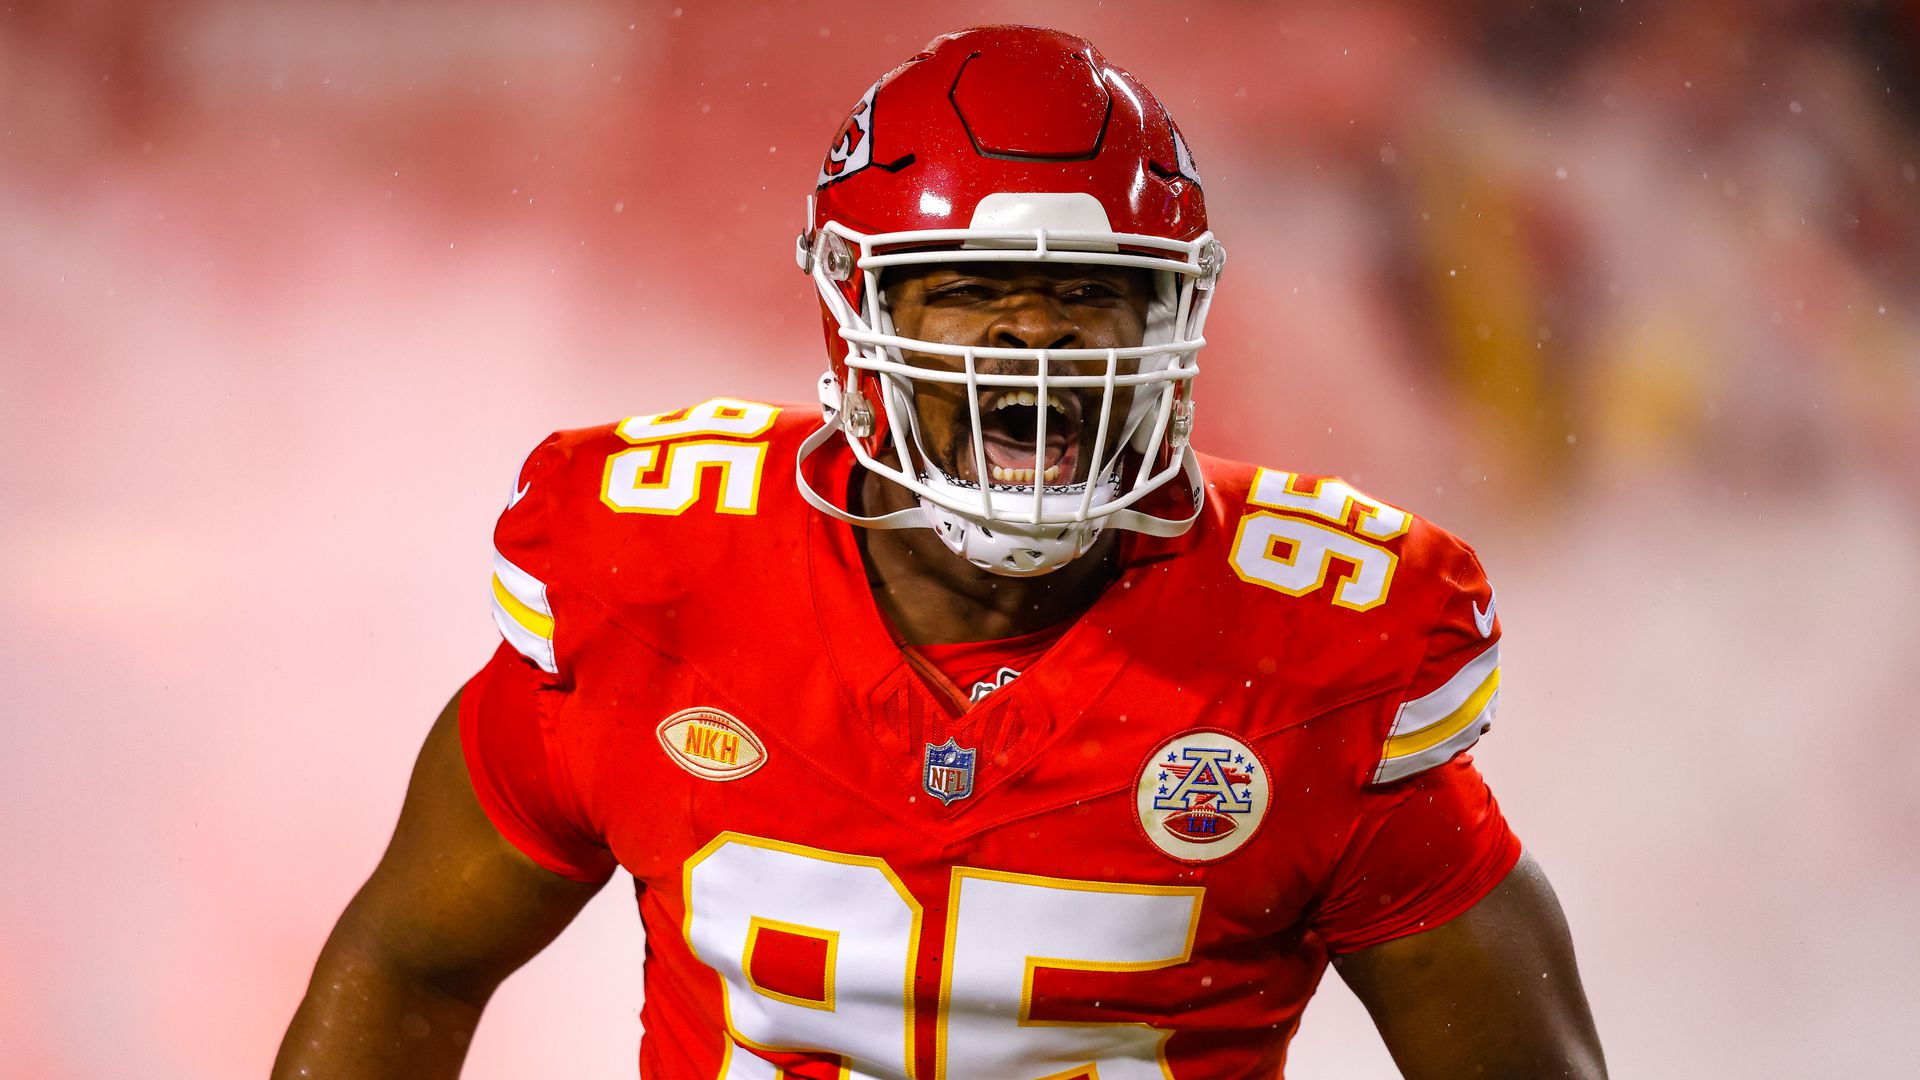 7 chiefs land on pro football focus list of top 200 free agents, including no. 1